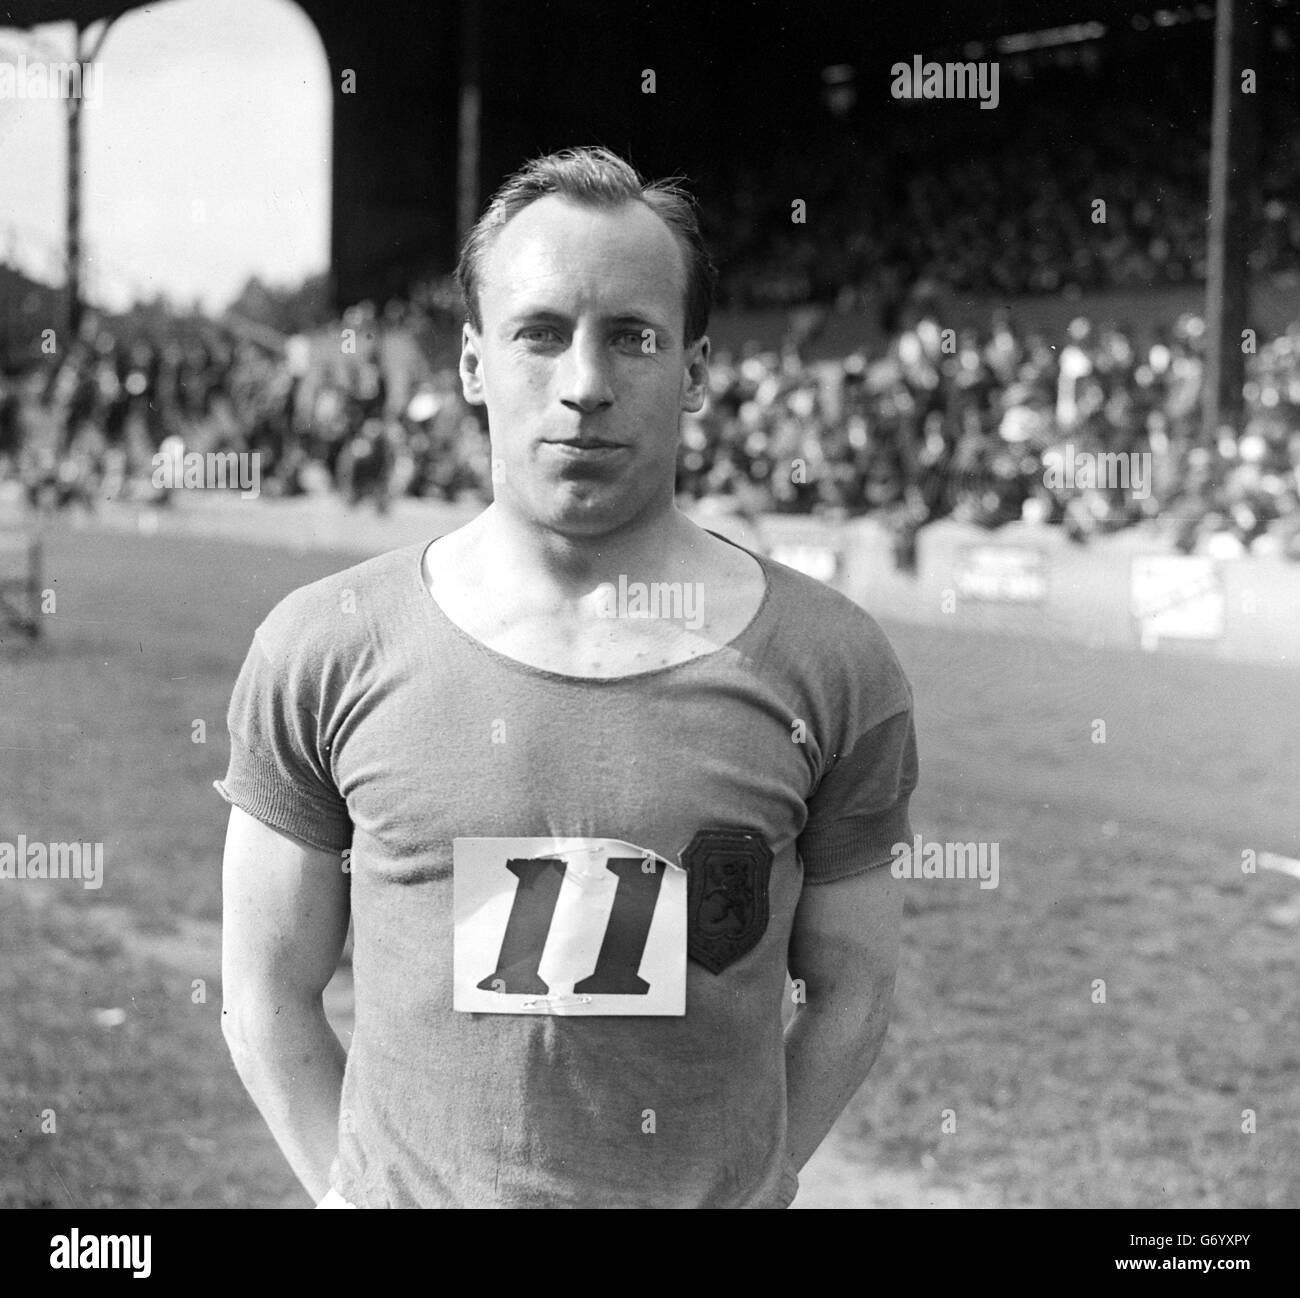 Eric Liddell, the Scottish Missionary who won the Gold in the 400 metres at the 1924 Olympic Games in Paris. His story was made famous by the film, 'Chariots of Fire'. After quitting athletics he became a christian missionary in China, until captured by the Japanese. He died in a POW Camp in 1945. Stock Photo